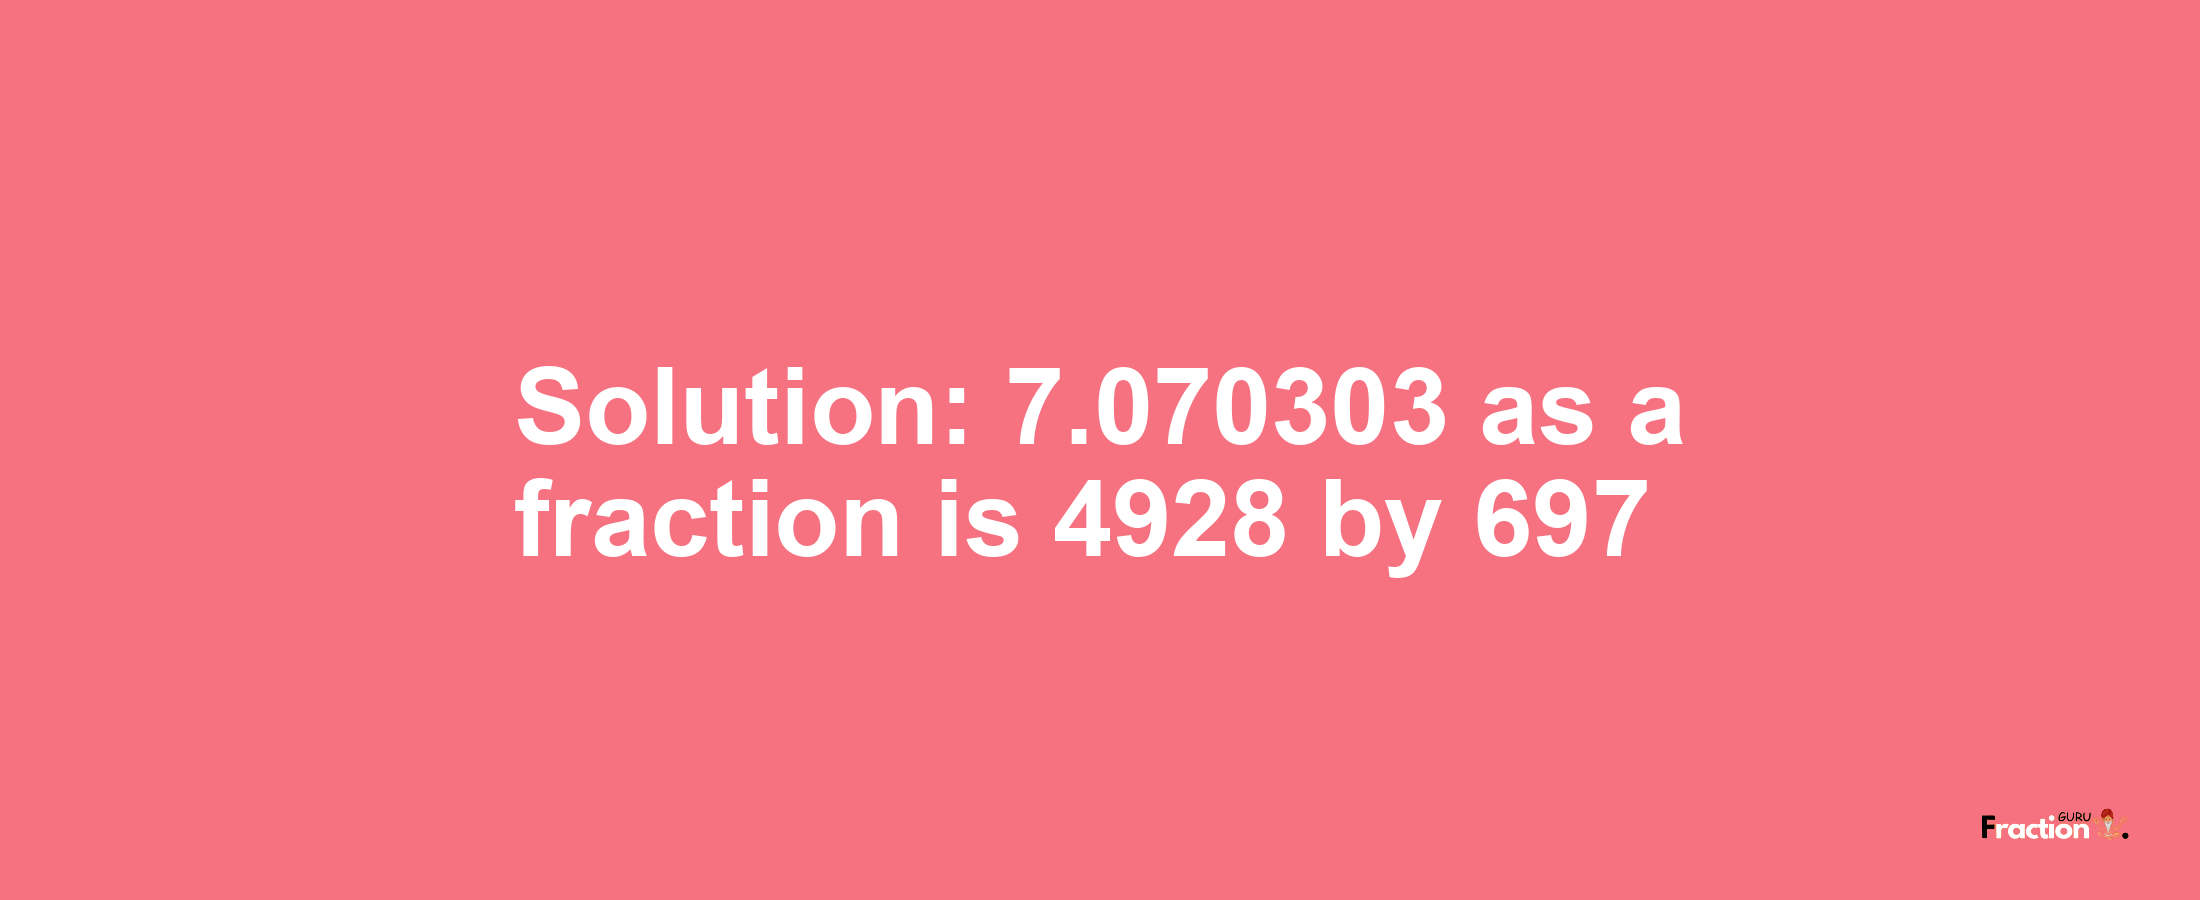 Solution:7.070303 as a fraction is 4928/697